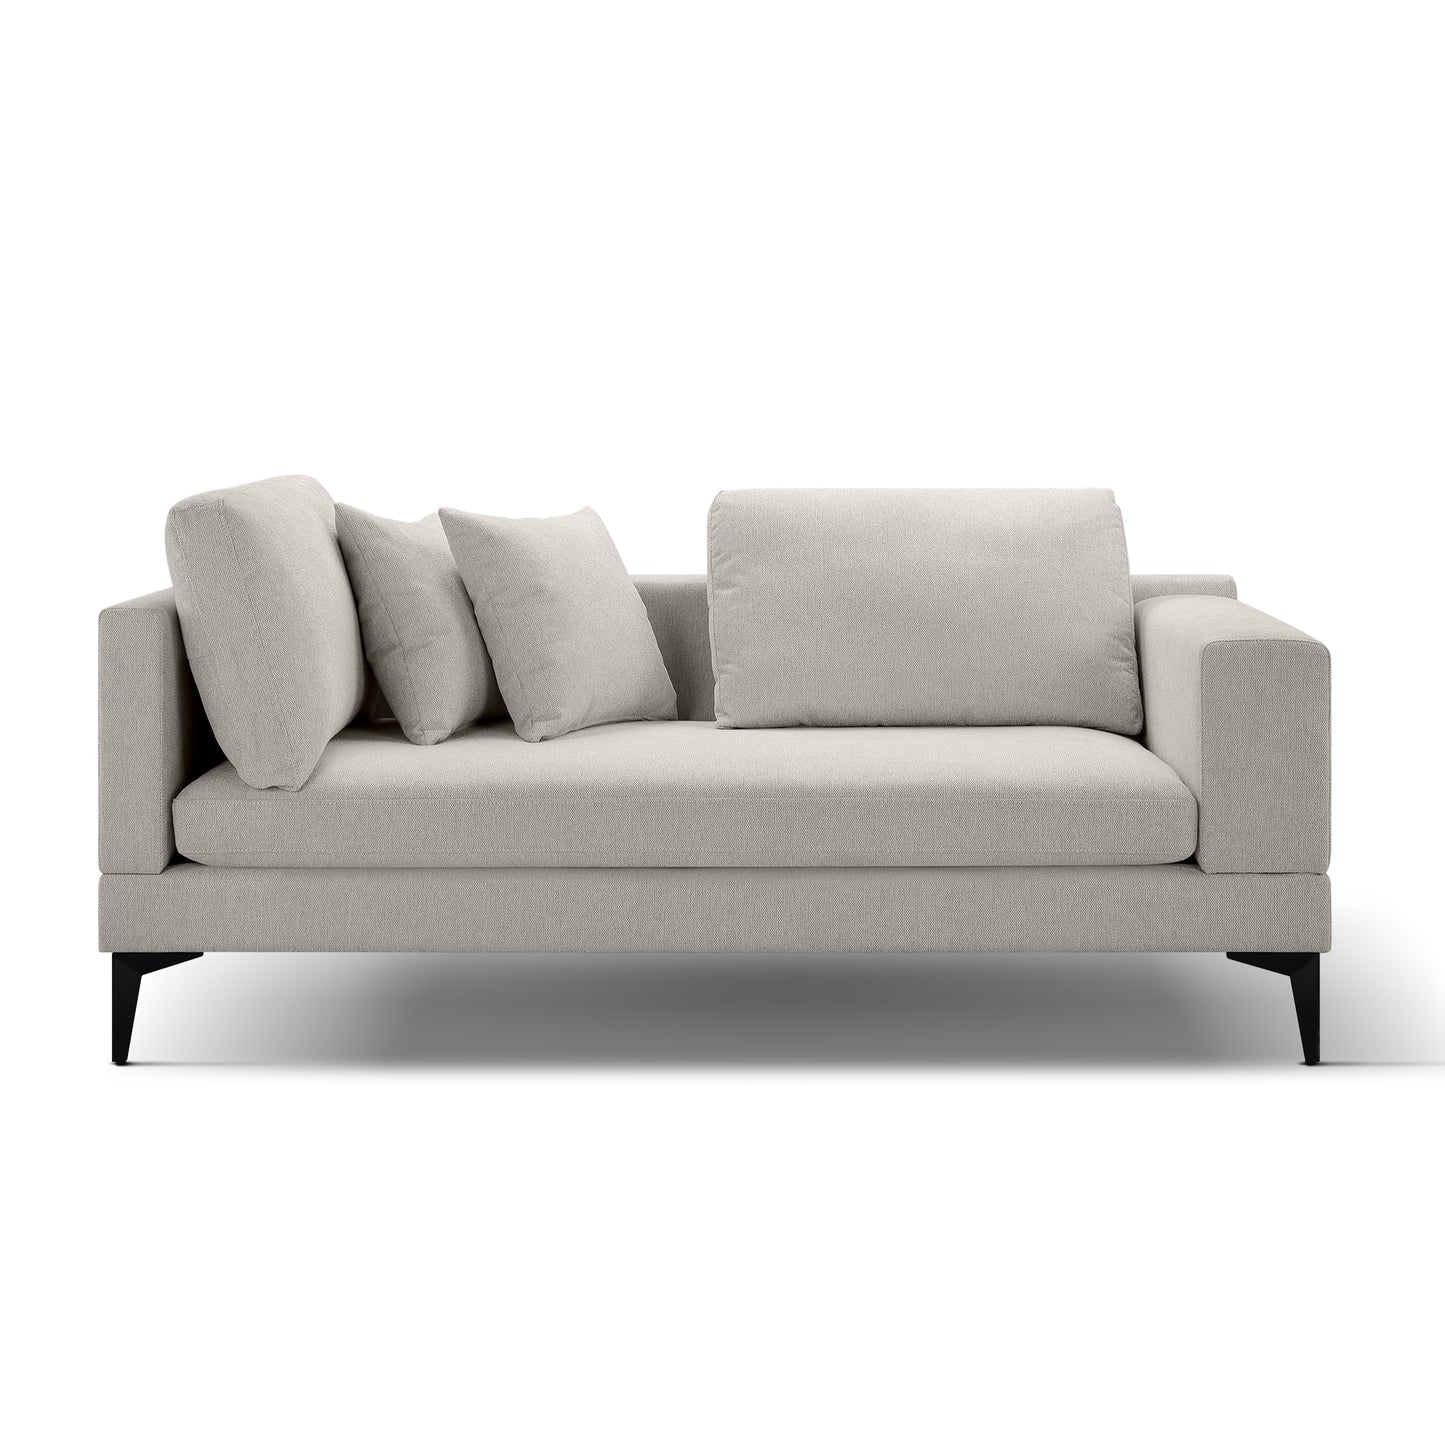 Champagne Luxury Modern 2 Seater Couch Reversible Arms + Metal Leg Accents + 2 Accent Pillows